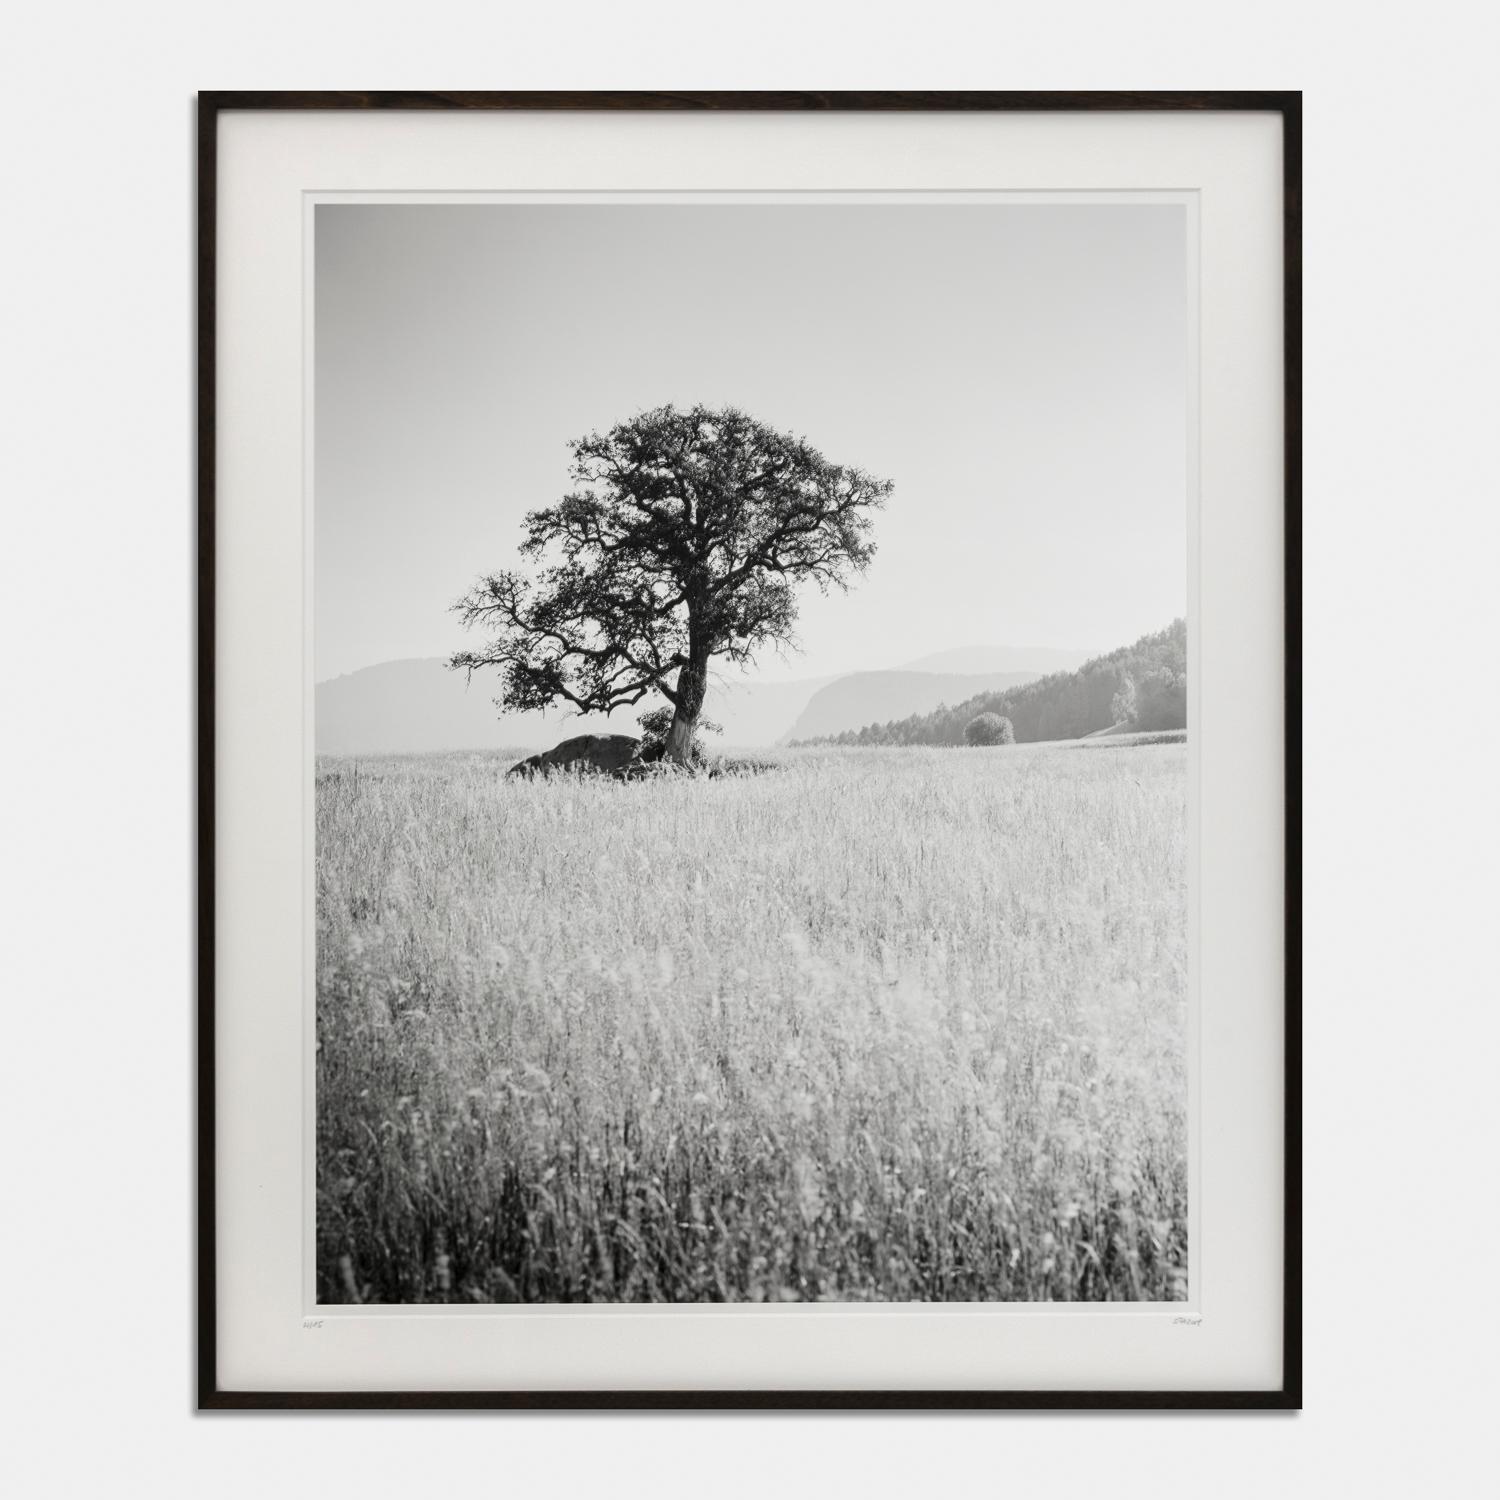 Gerald Berghammer Black and White Photograph - Morning Sun, Italy, black and white gelatin silver photography print, framed art